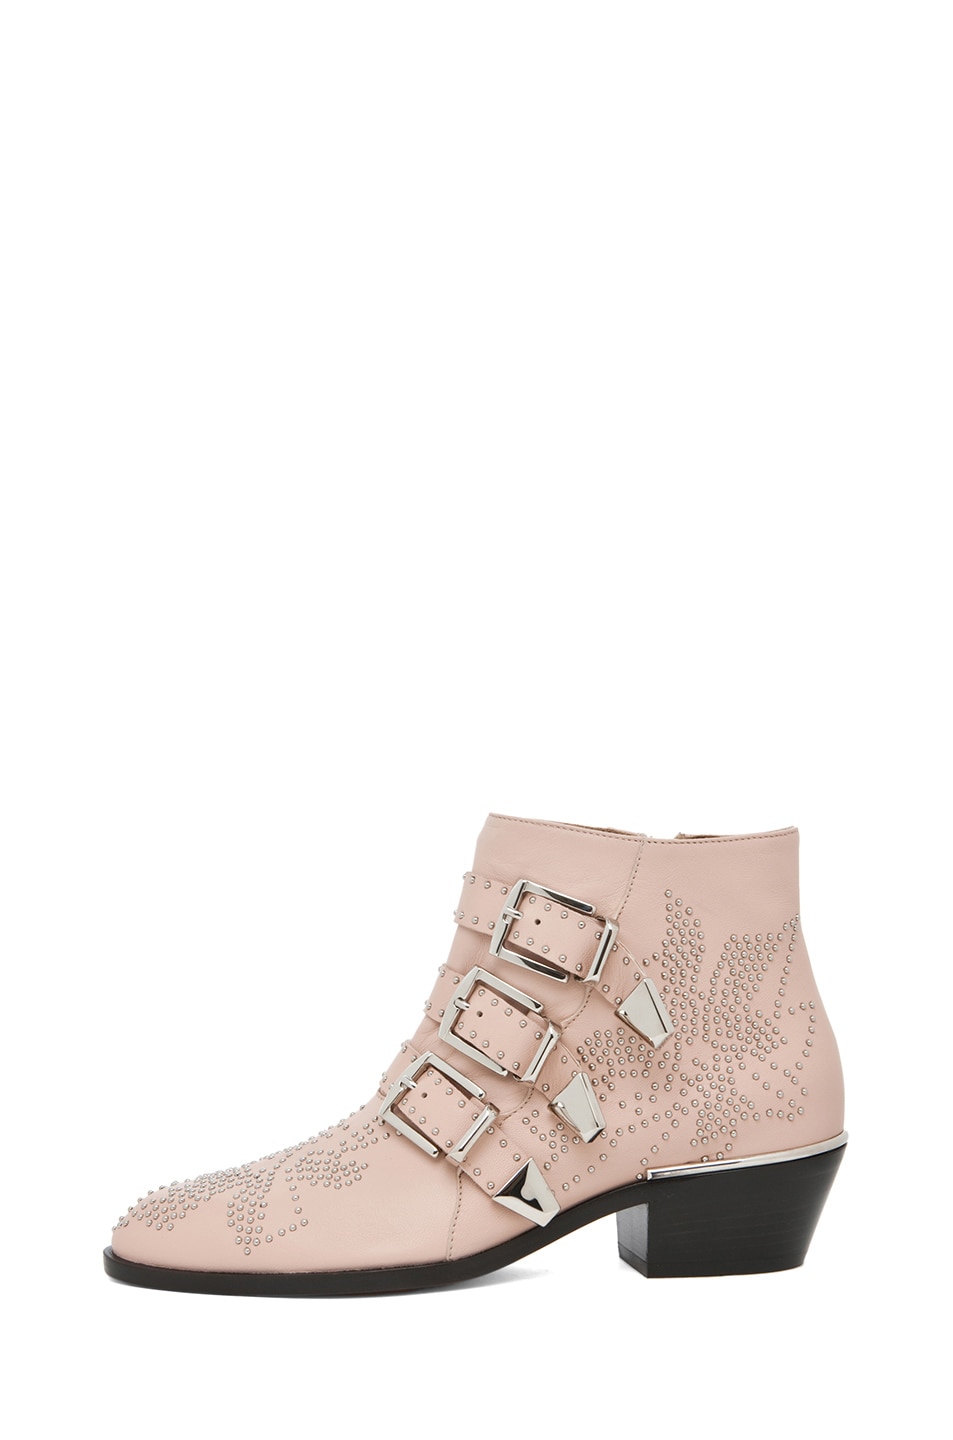 Image 1 of Chloe Susanna Leather Studded Bootie in Nude Pink